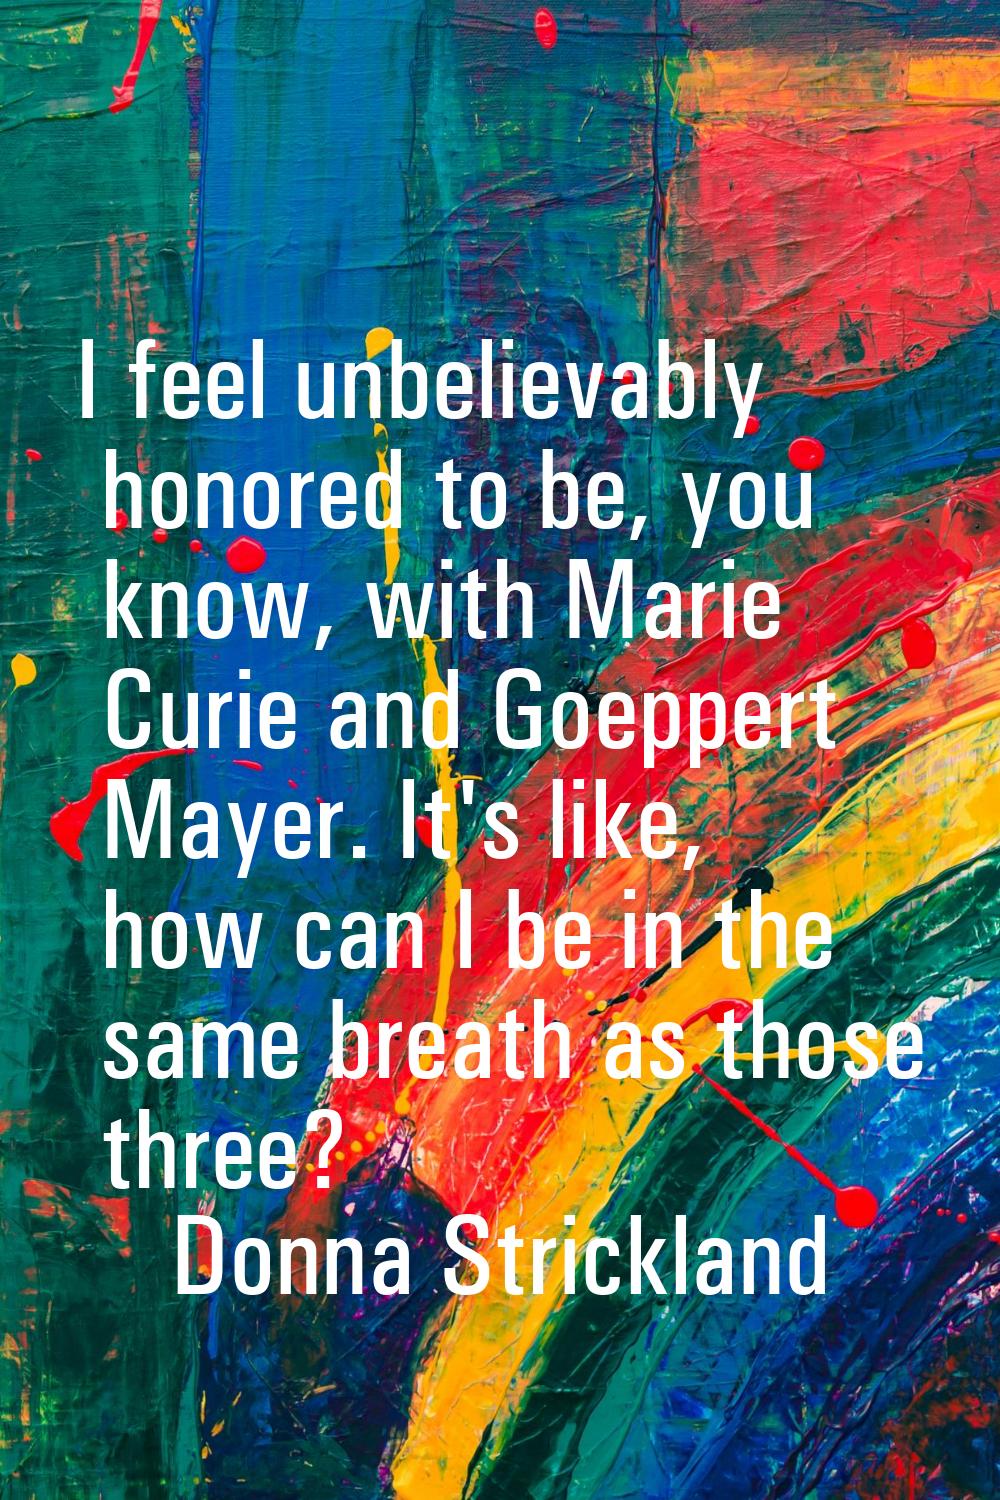 I feel unbelievably honored to be, you know, with Marie Curie and Goeppert Mayer. It's like, how ca